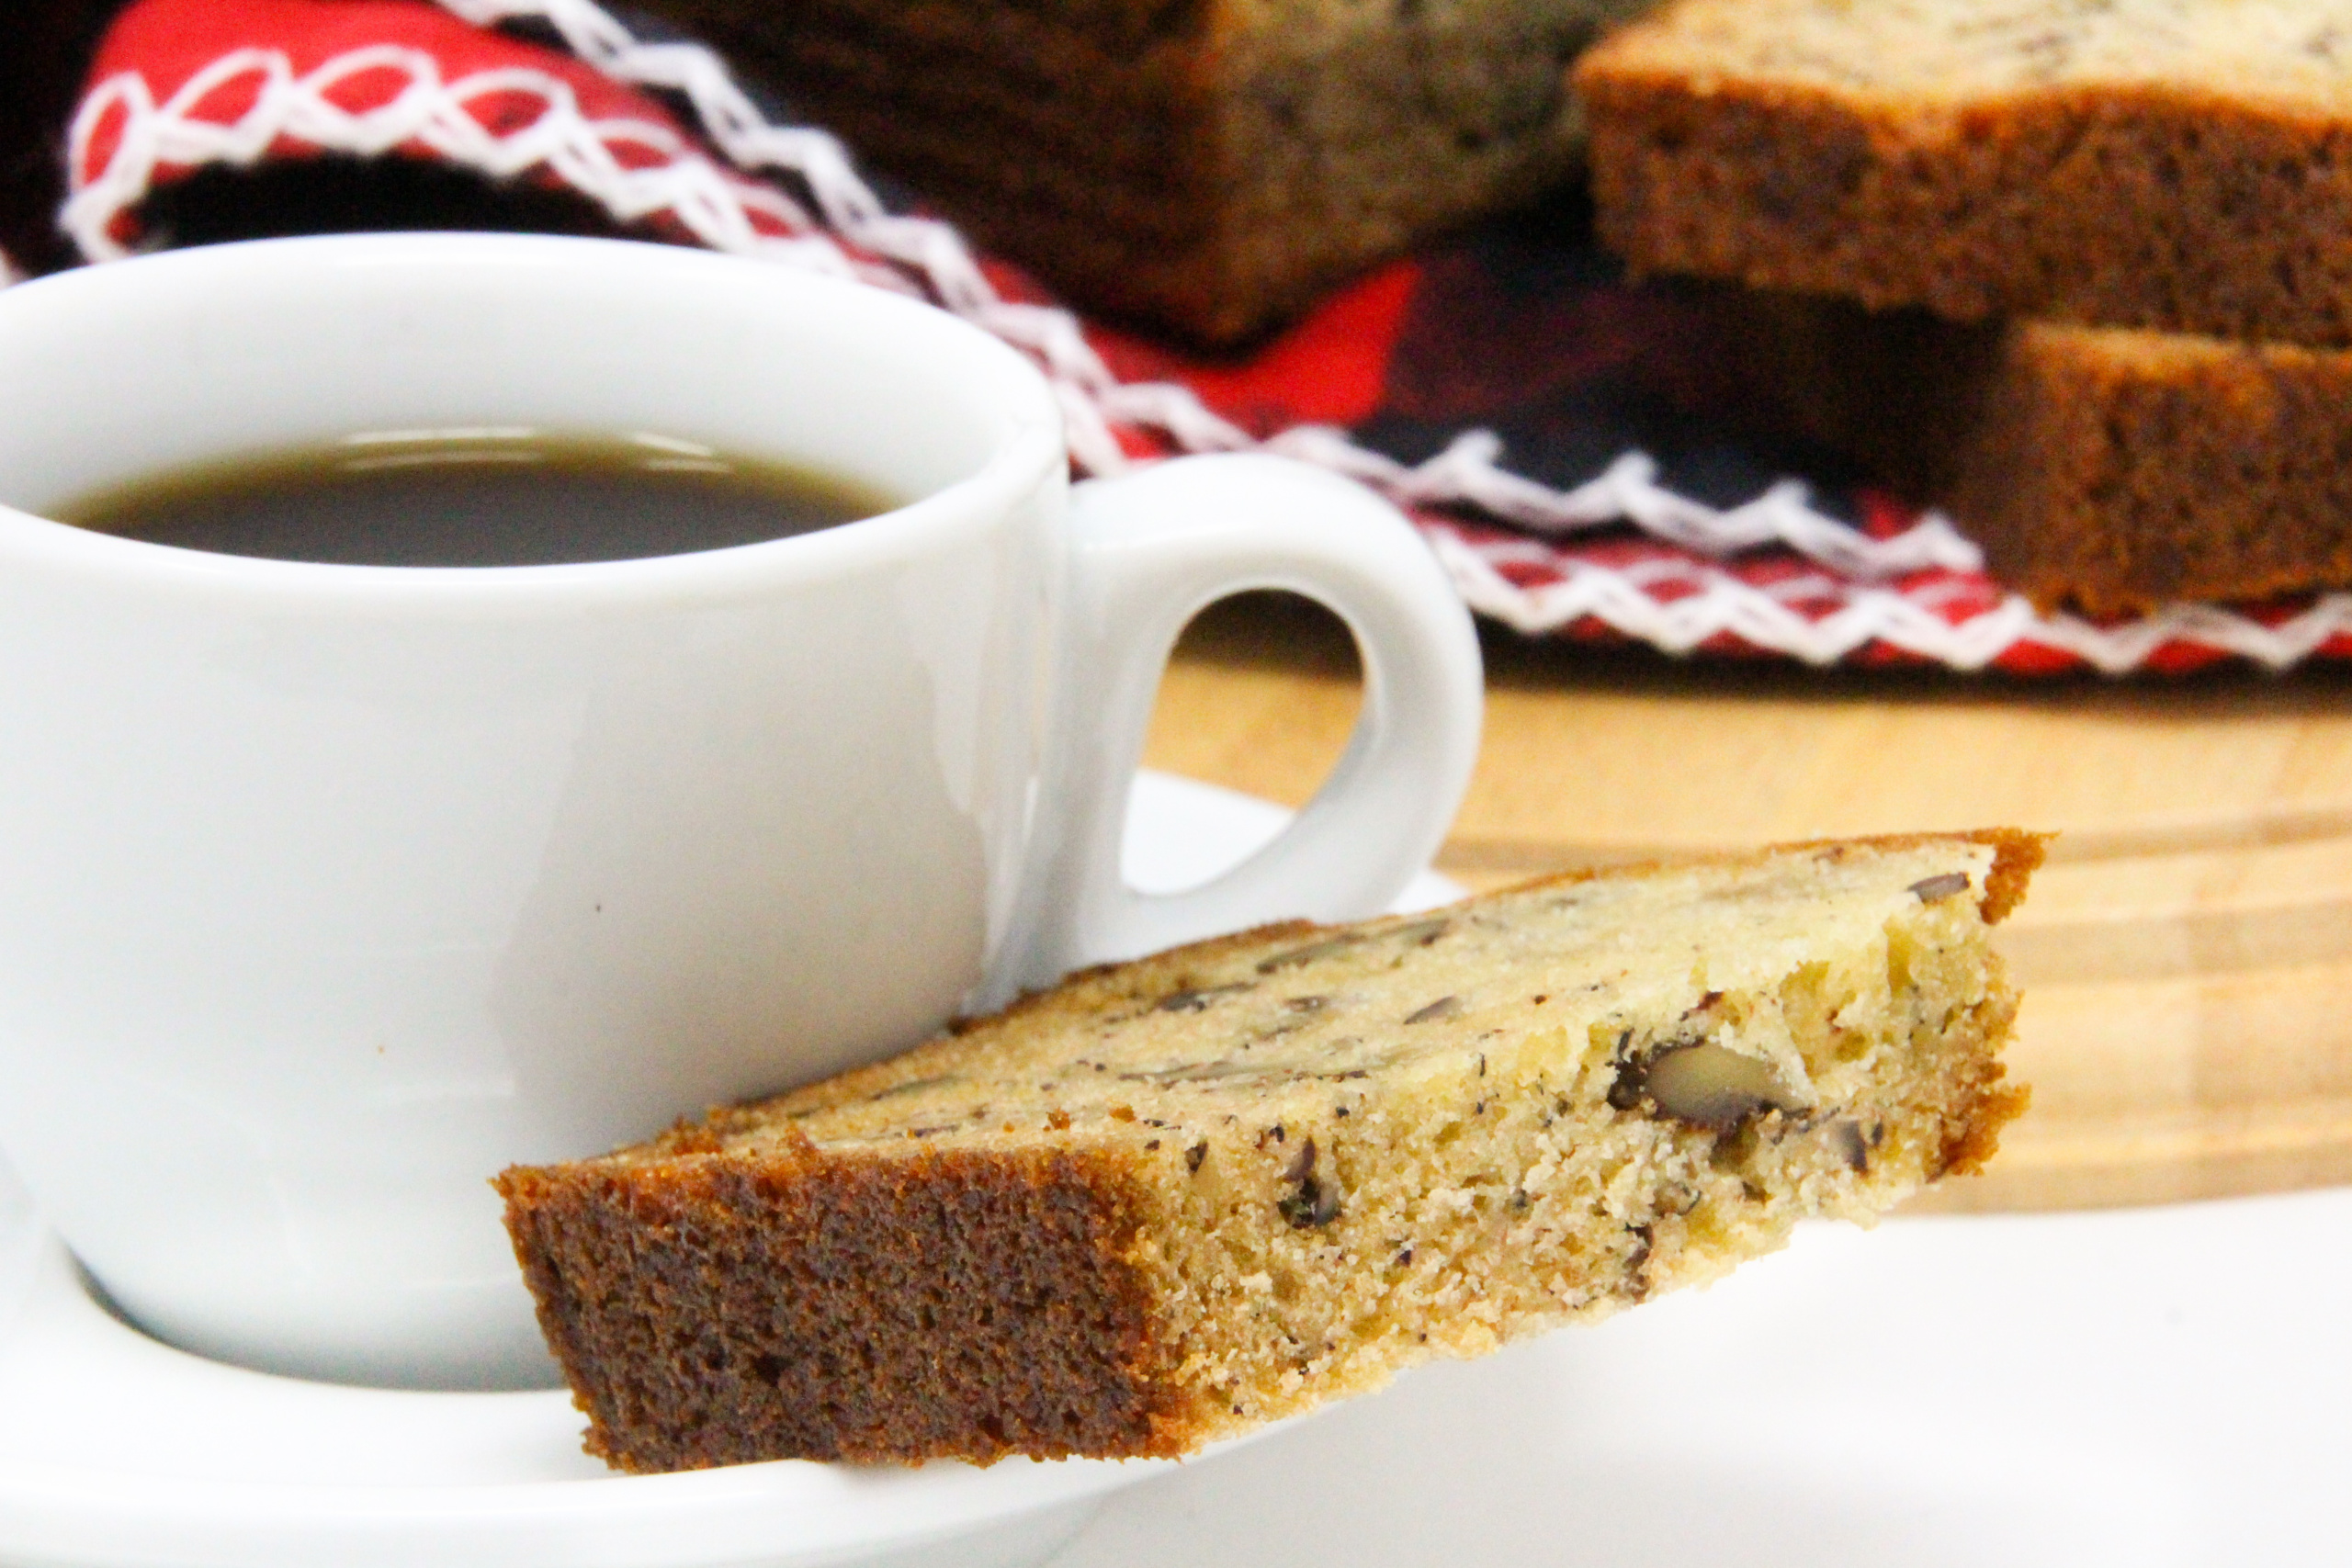 Easy to mix up, this moist sweet banana bread is delicious all on its own or slathered with sweet cream butter. Perfect for breakfast, a snack, or even dessert! Recipe shared with permission granted by Barbara Ross, author of SHUCKED APART.